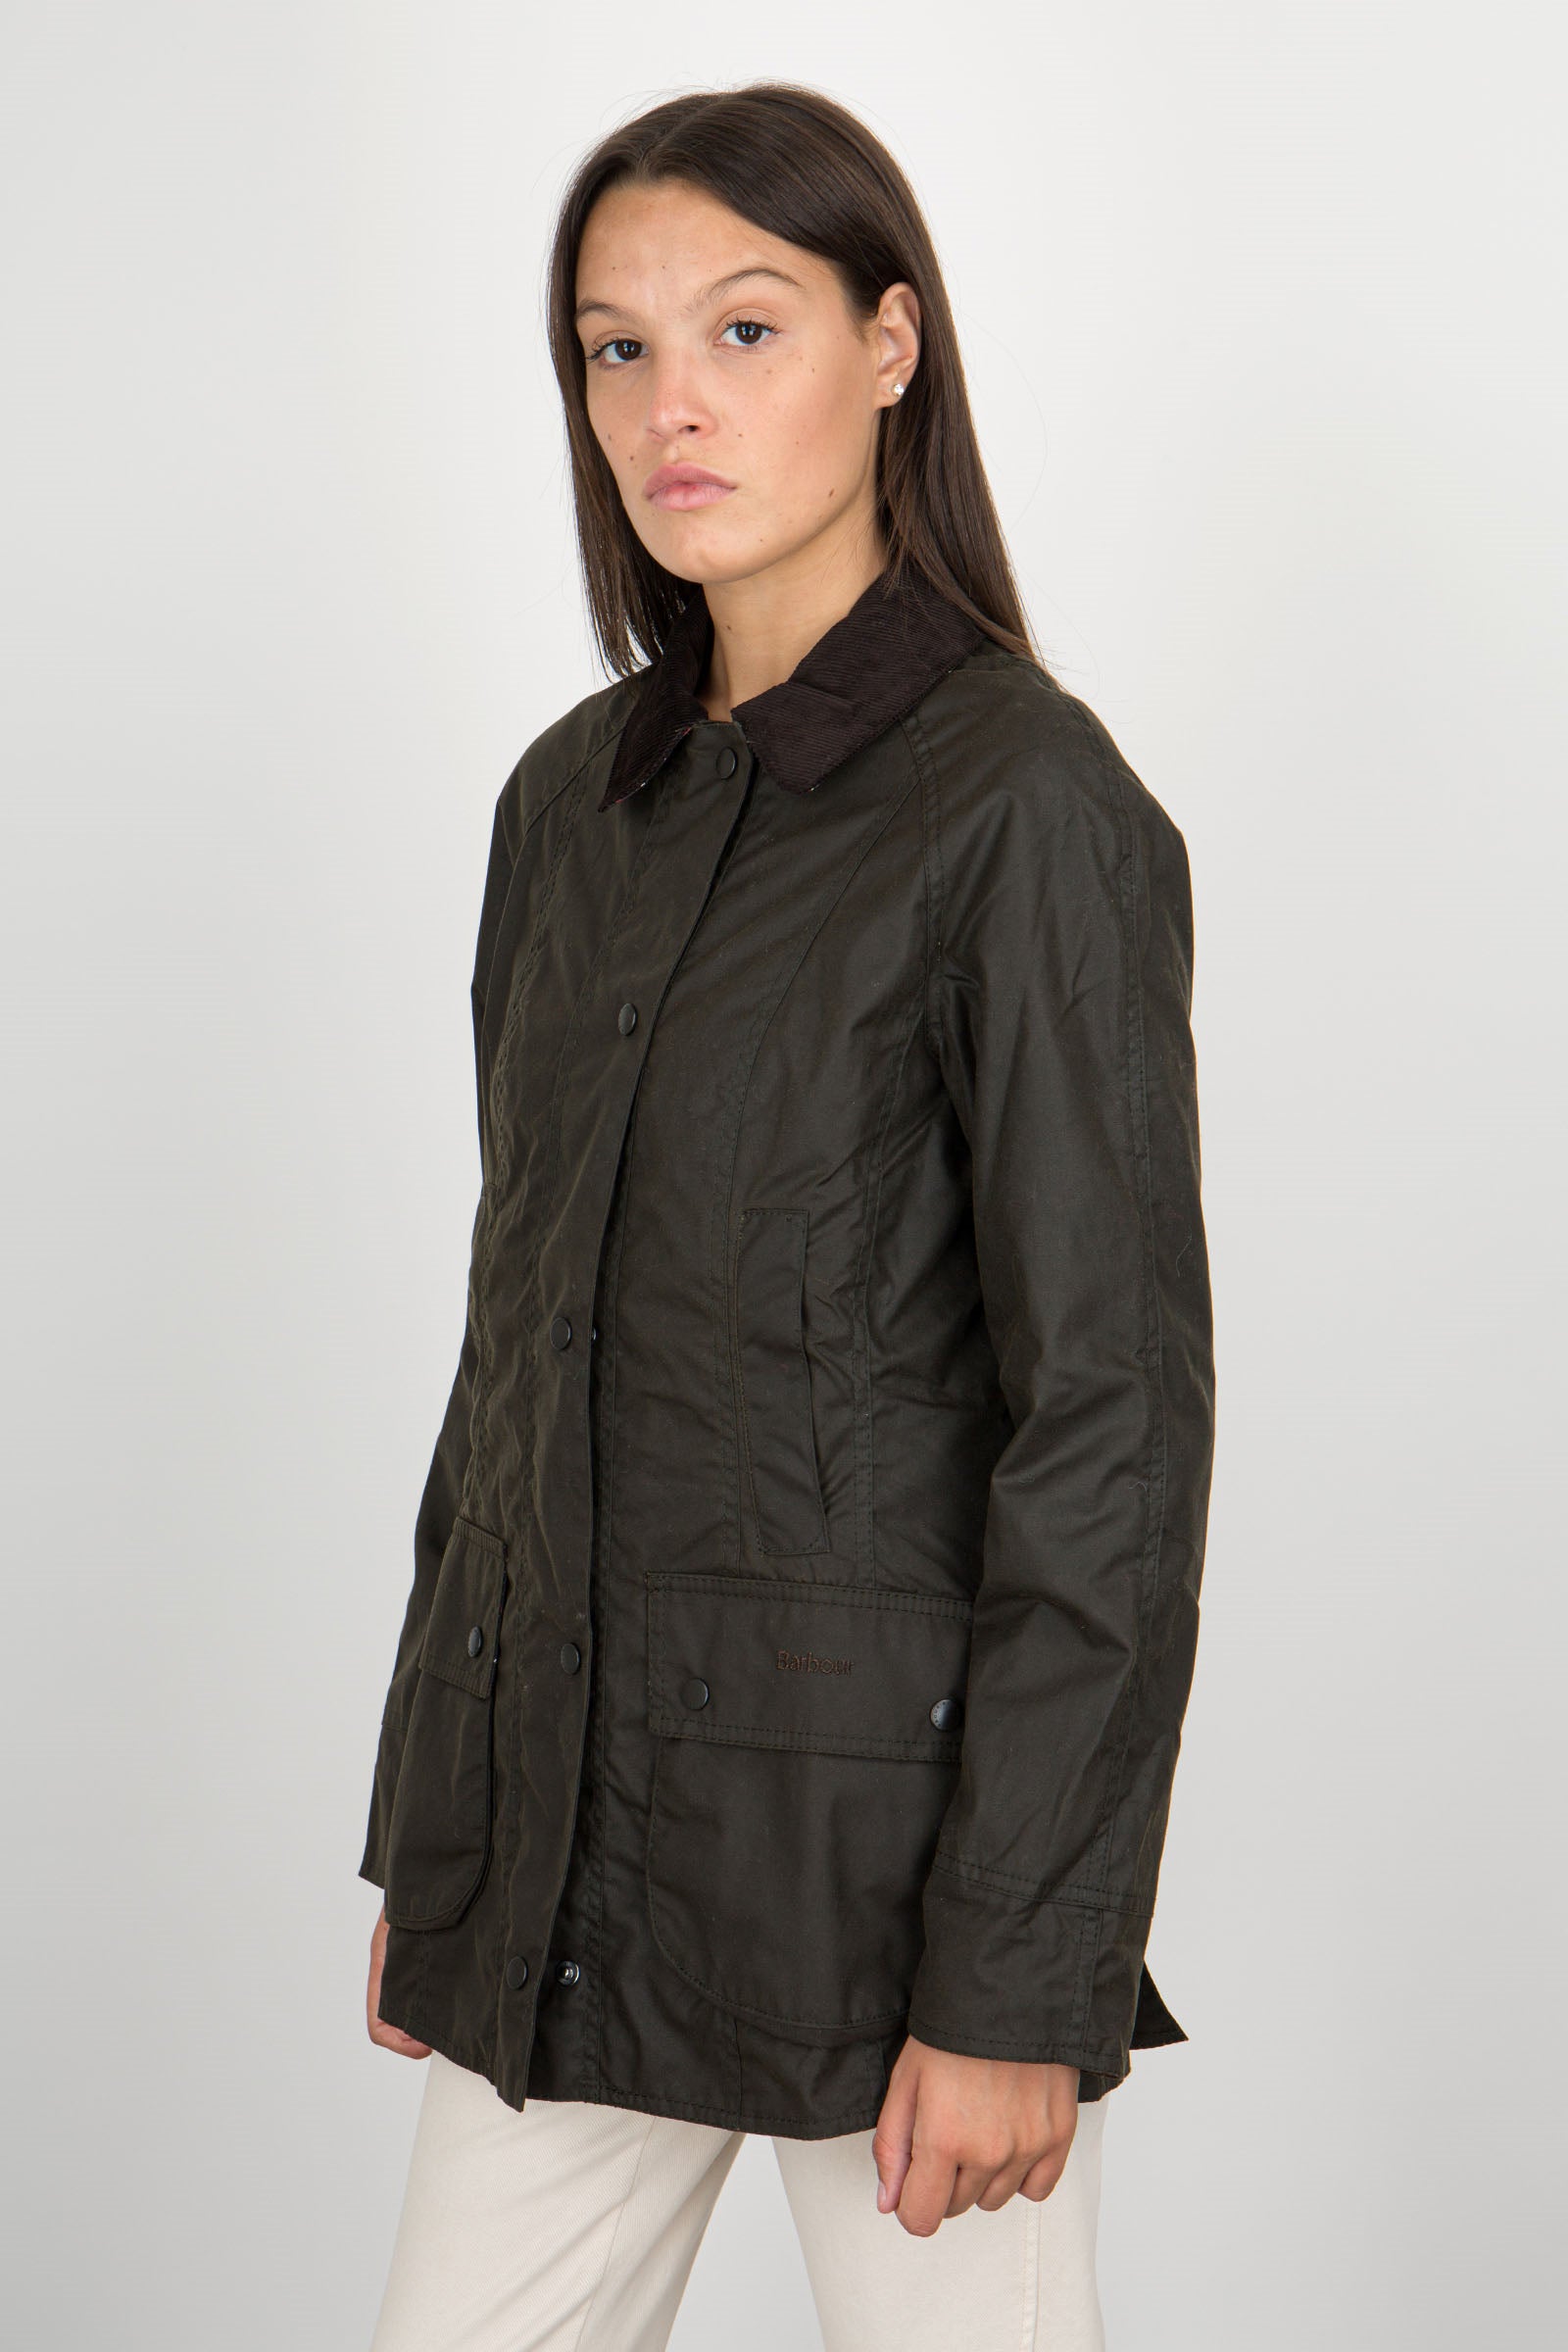 Barbour Giubbotto Beadnell Wax Olive Verde Oliva Donna - 4